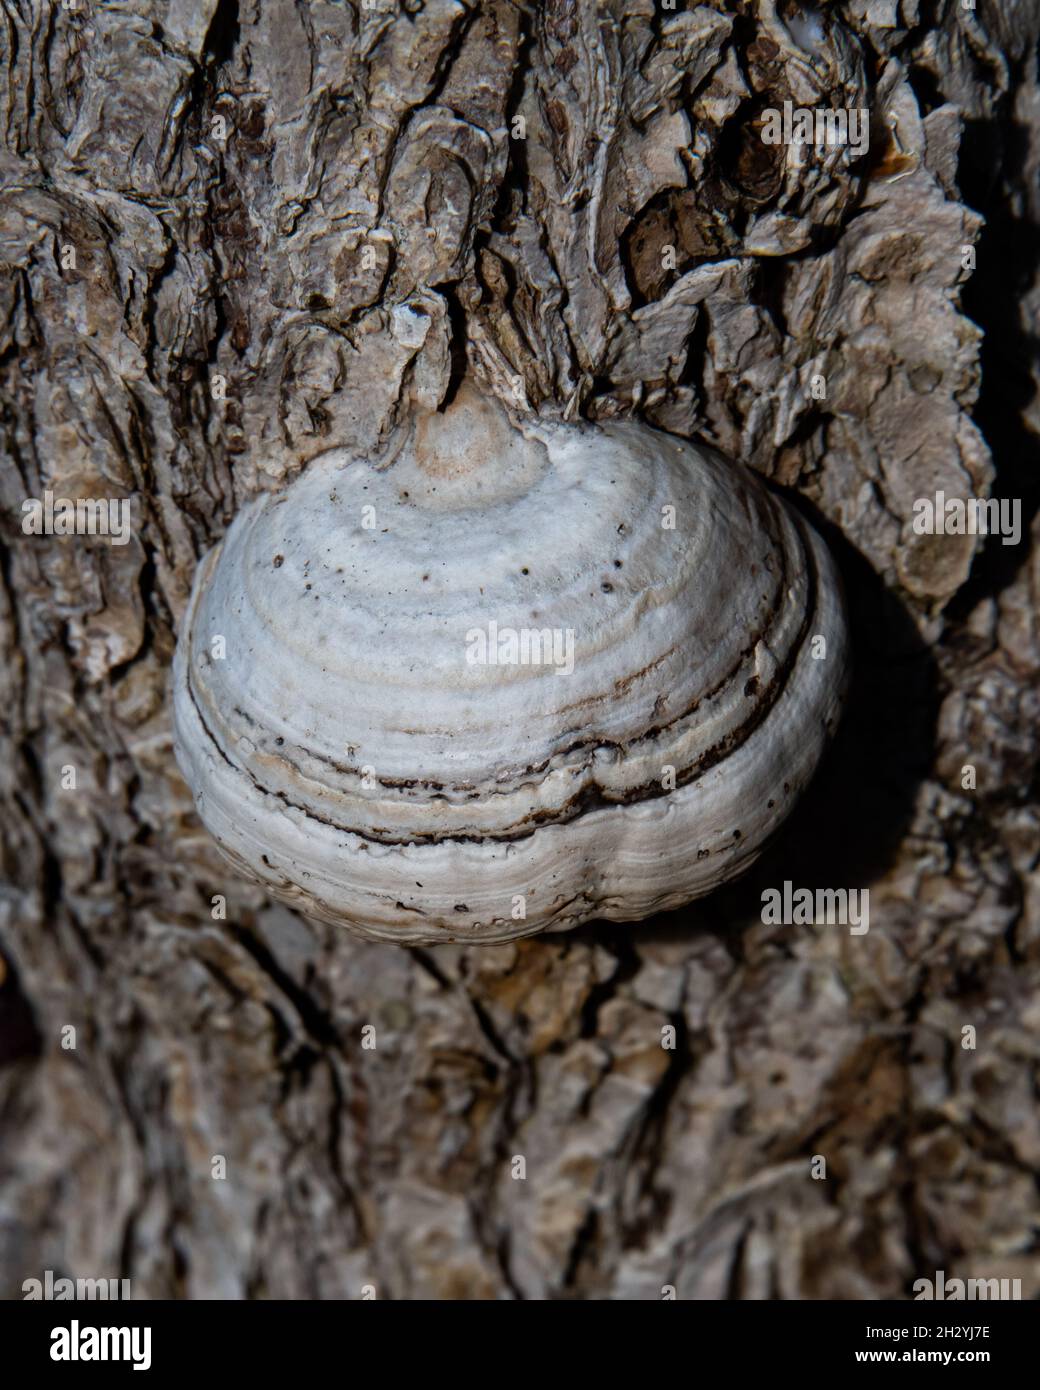 A tinder conk mushroom, Fomes fomentarius, growing on the bark of a maple tree in the Adirondack Mountains, NY Stock Photo